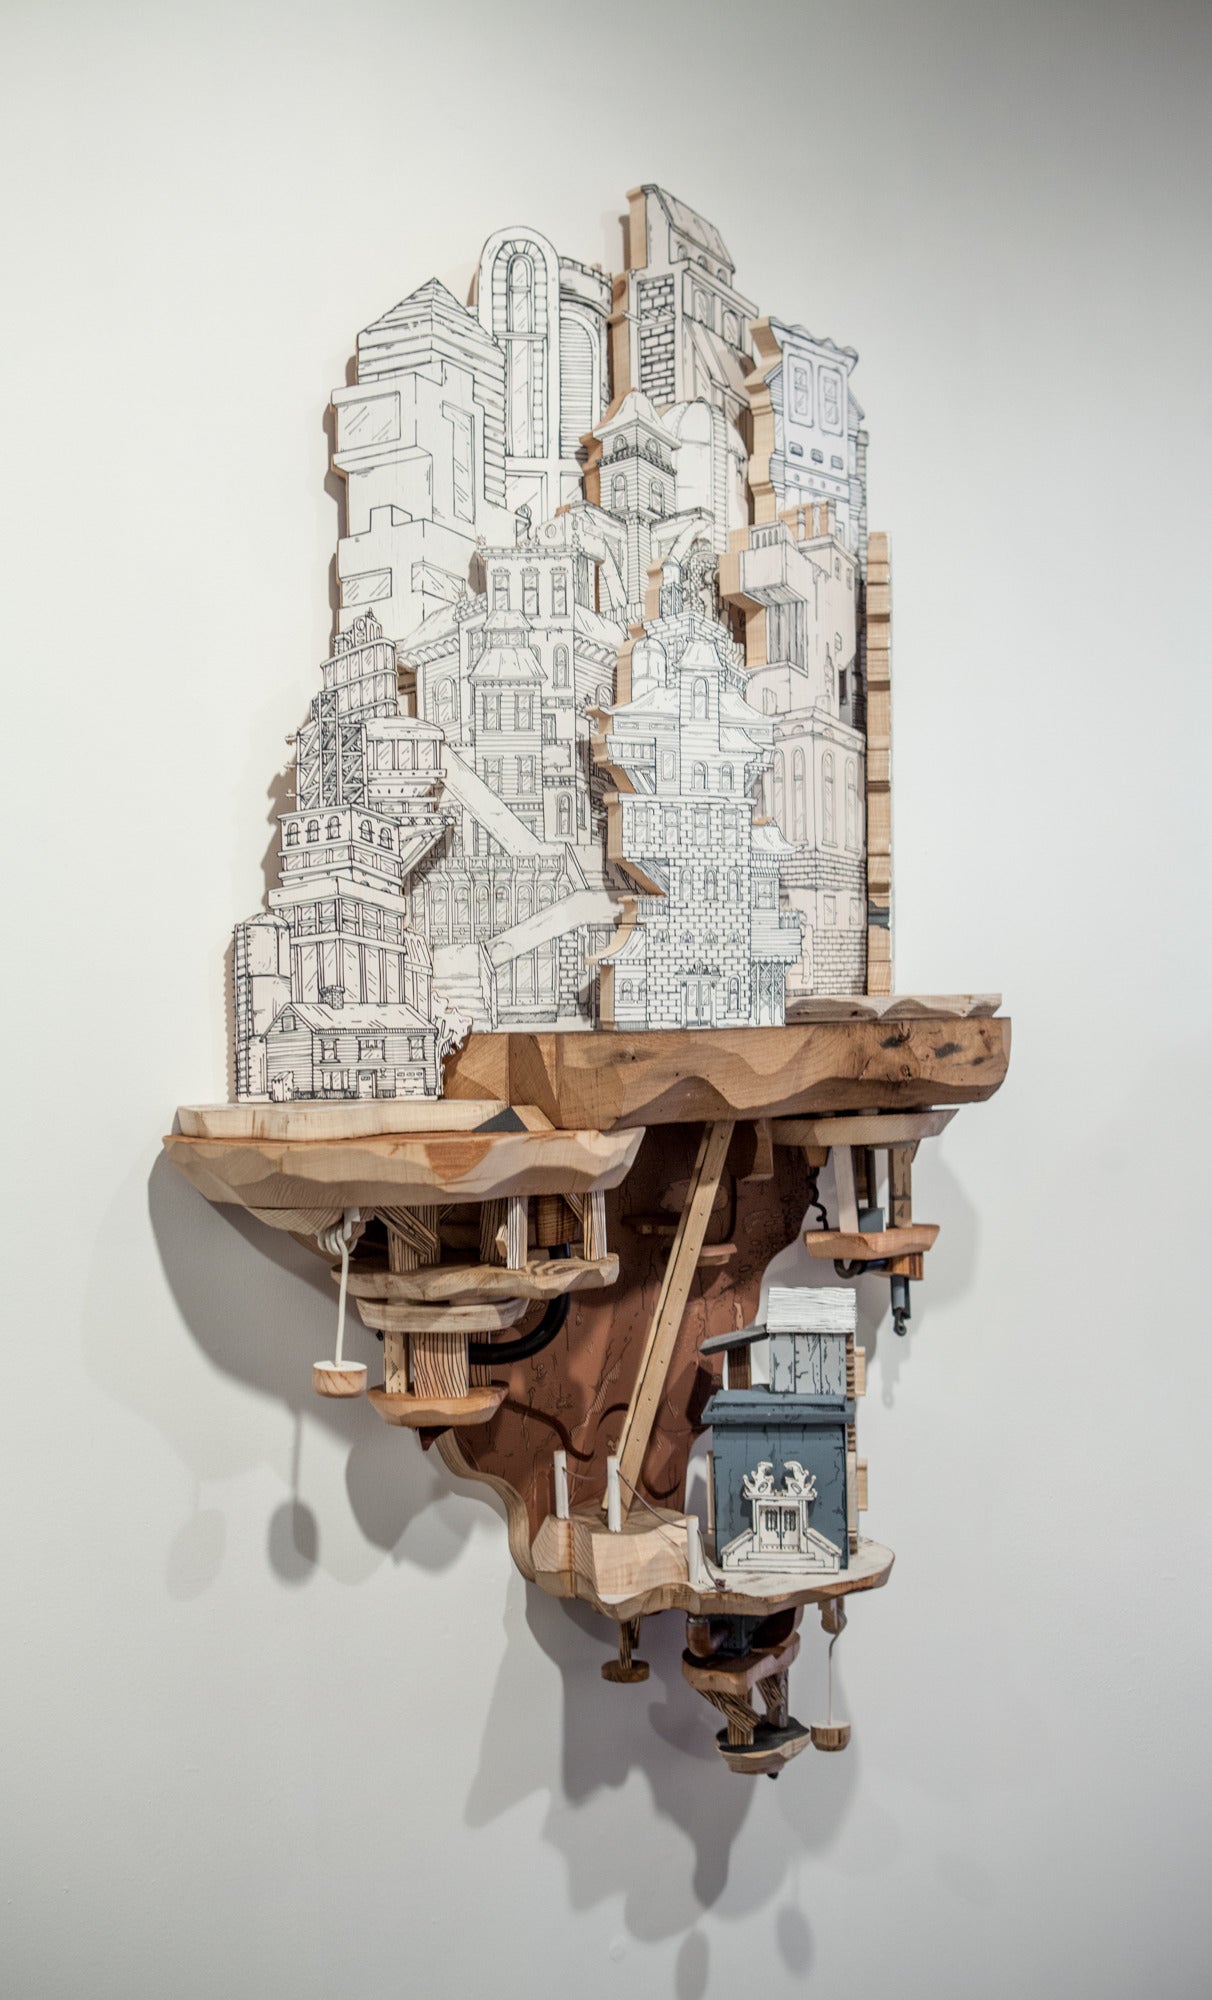 Silkscreen printed wood cut and assembled into three-dimensional sculptures

Artist Statement // My work is about the intersection of built environments and subterranean systems. I create drawings and sculptures of fantastical urban environments.